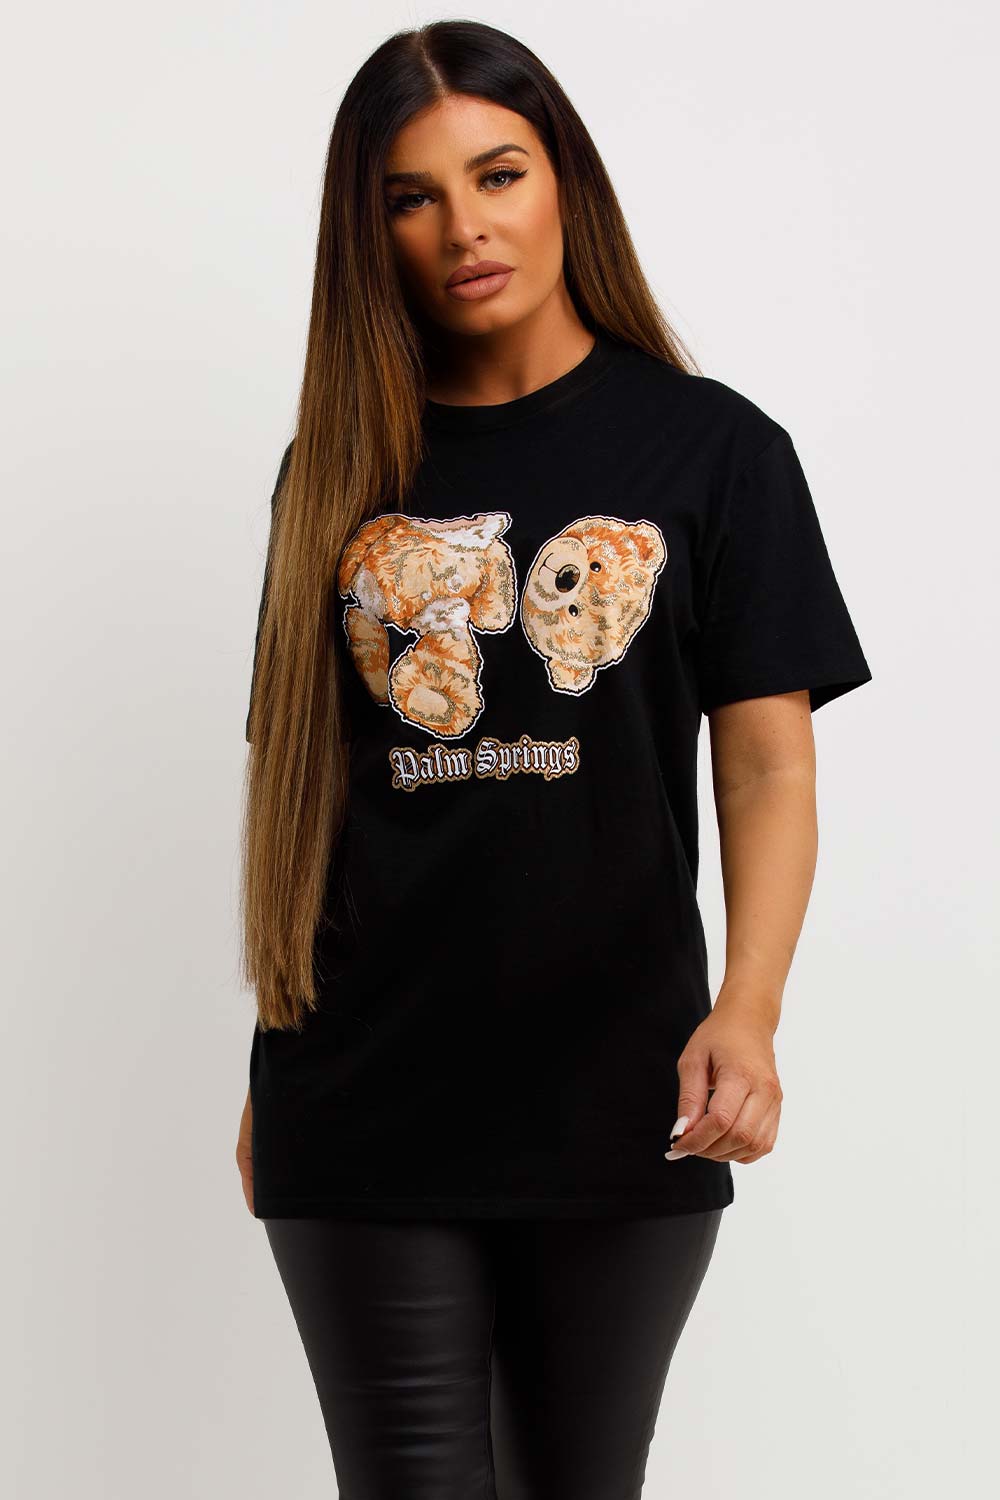 black t shirt with teddy bear graphics and palm springs